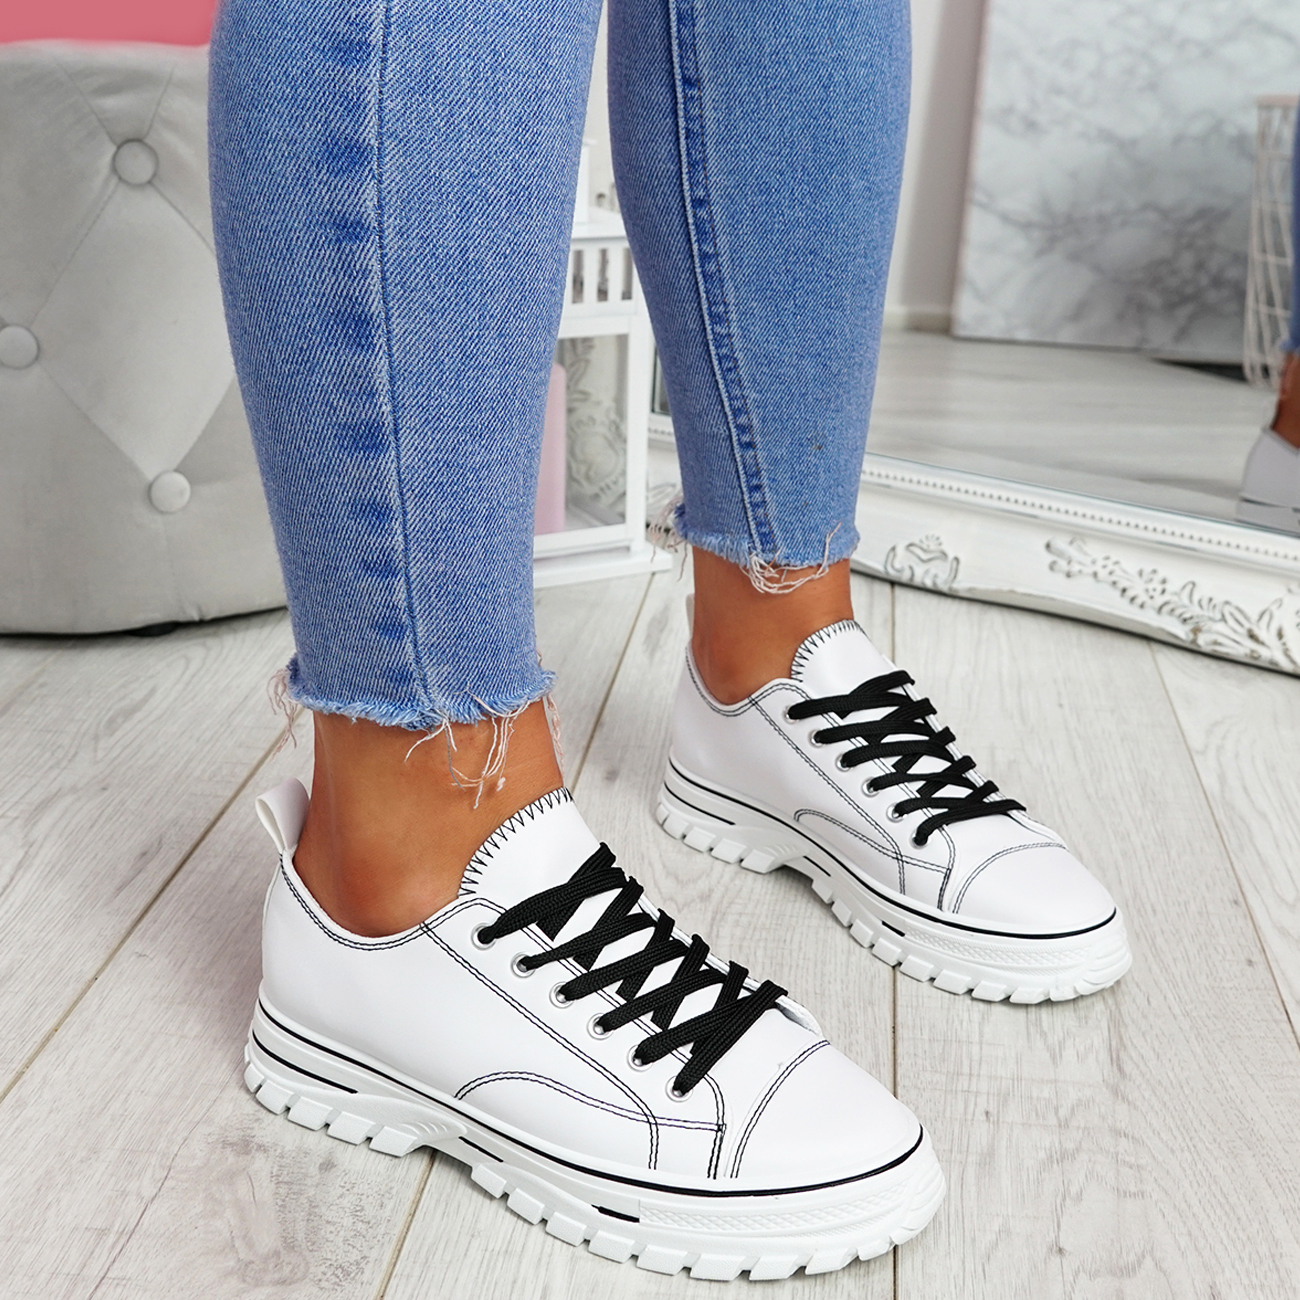 WOMENS LADIES LACE UP TRAINERS COMFY CASUAL CHUNKY SNEAKERS PLIMSOLLS ...